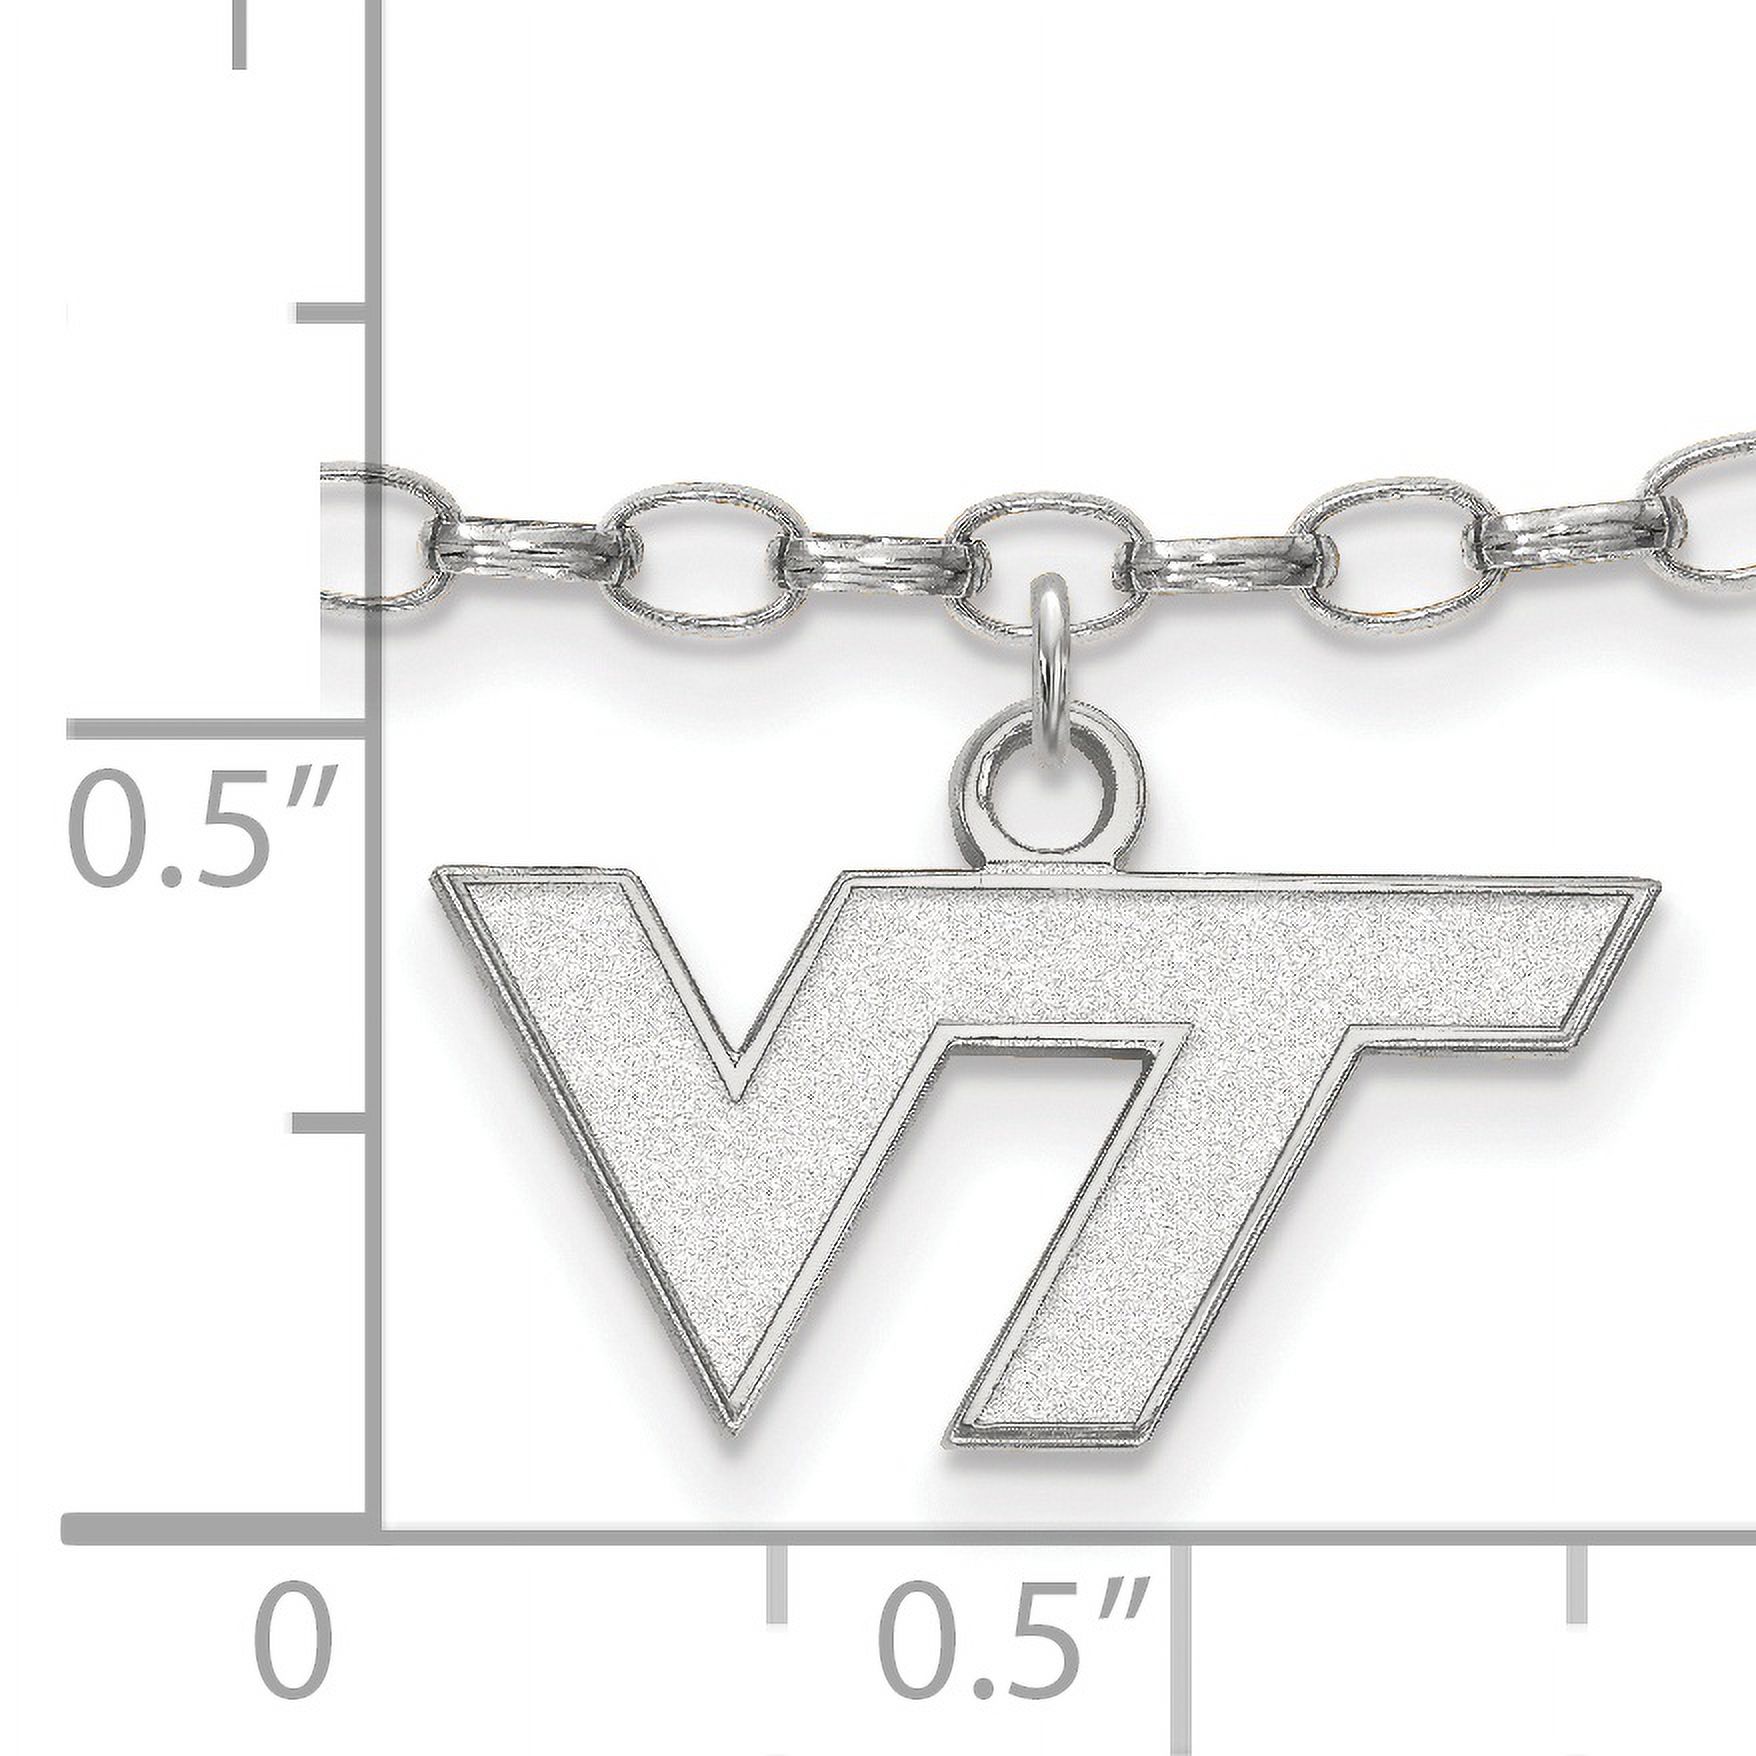 LogoArt Sterling Silver Rhodium-plated Virginia Tech Anklet - image 2 of 5